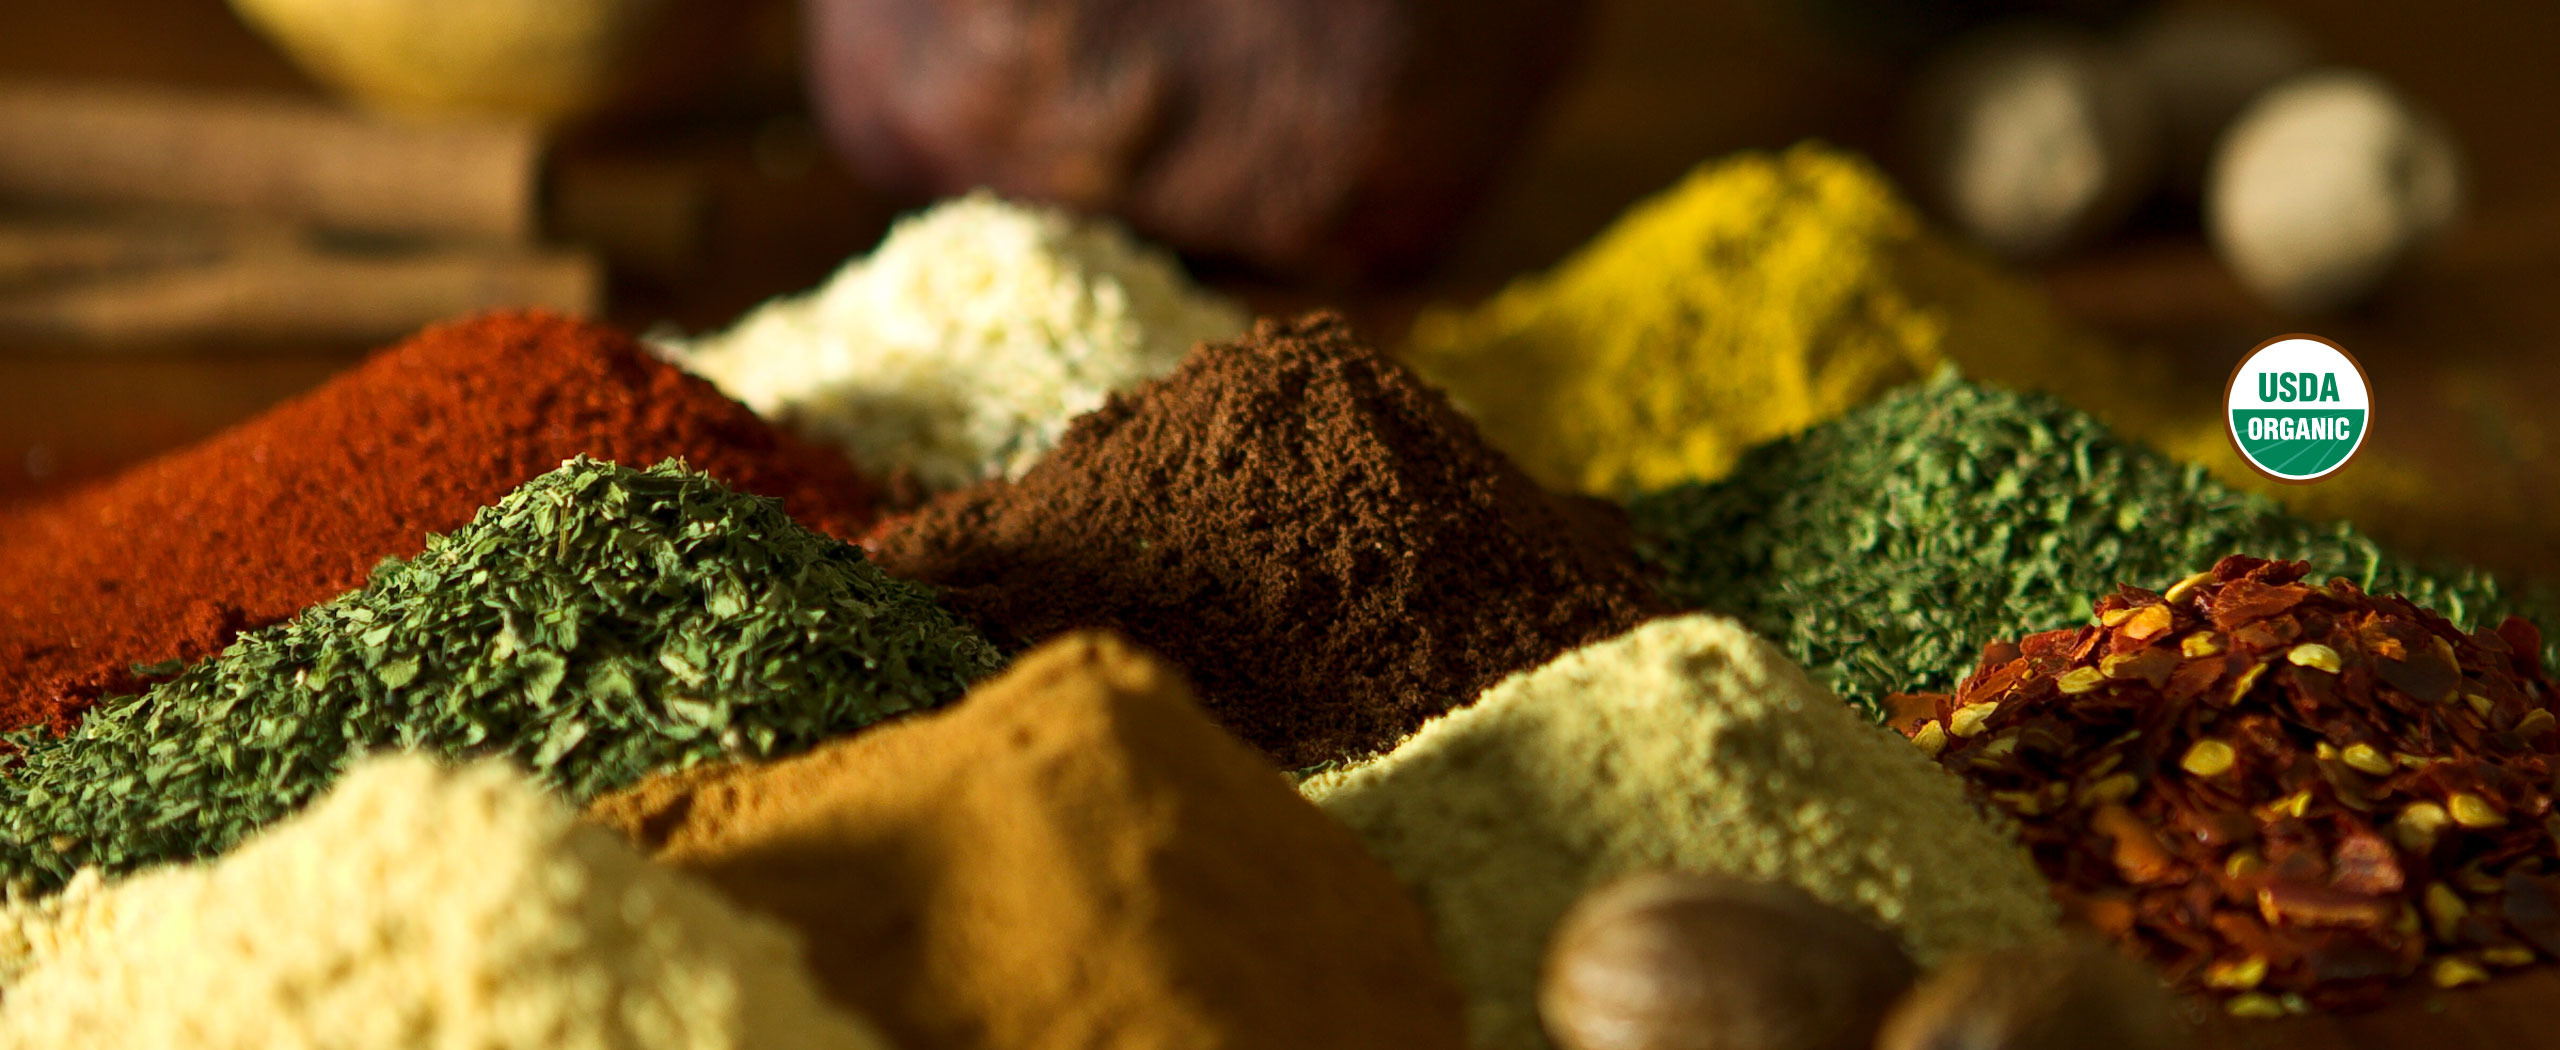 Organic Freshly Ground Spices - See, Smell, Taste the Difference